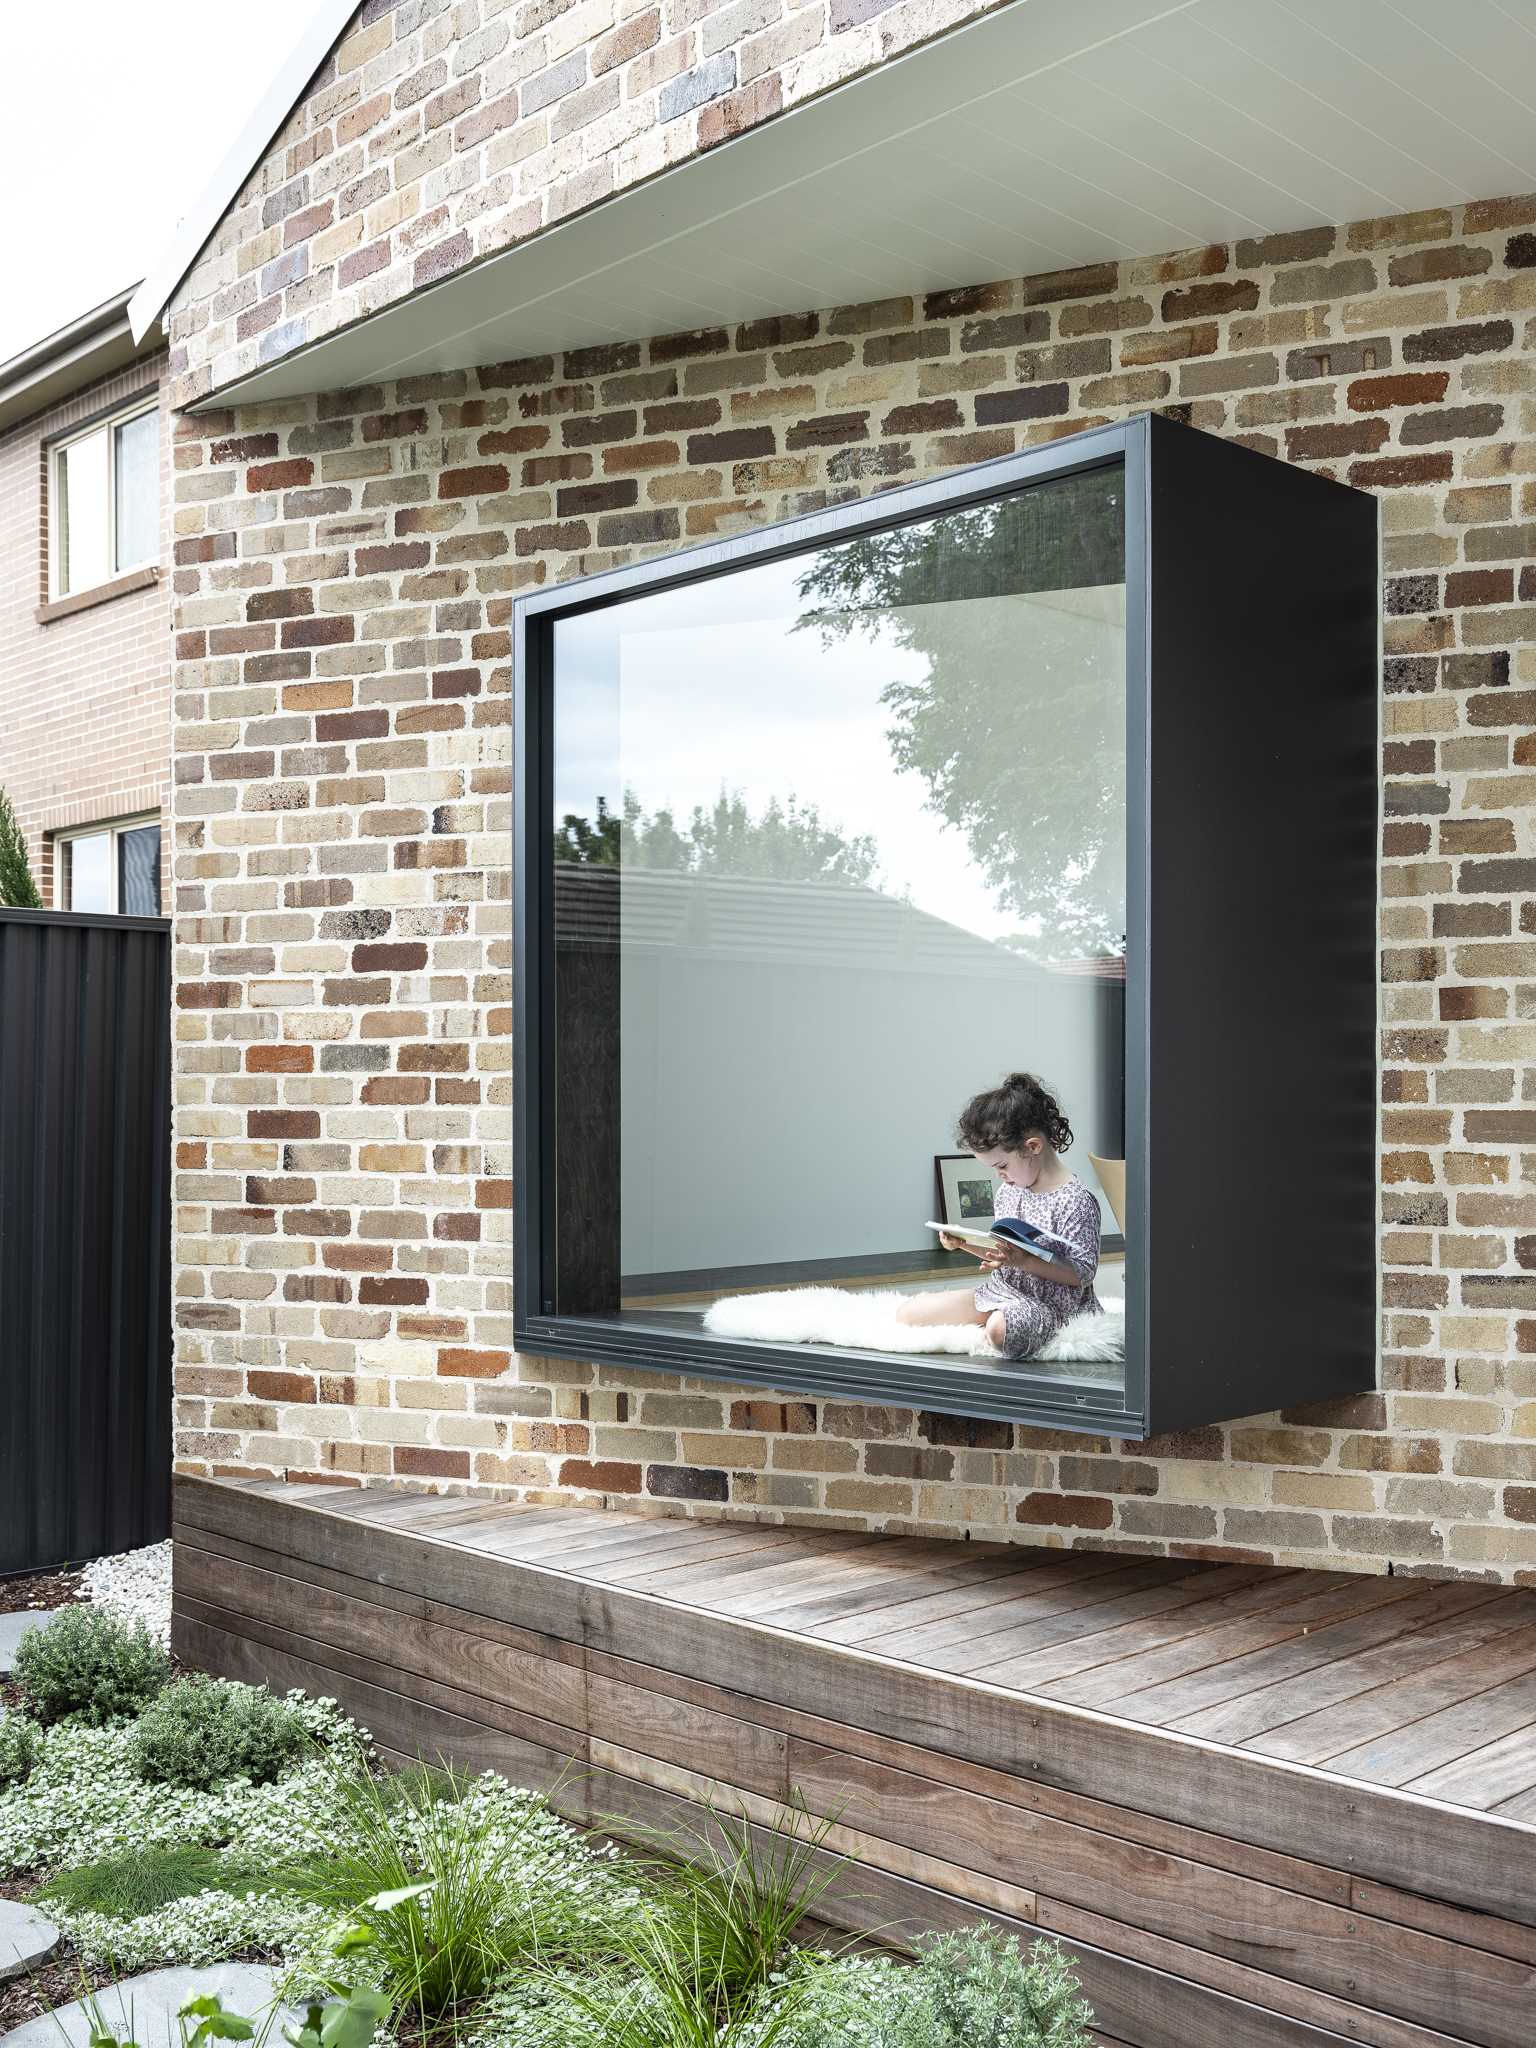 A modern recycled brick addition with an angled window seat that protrudes away from the wall.